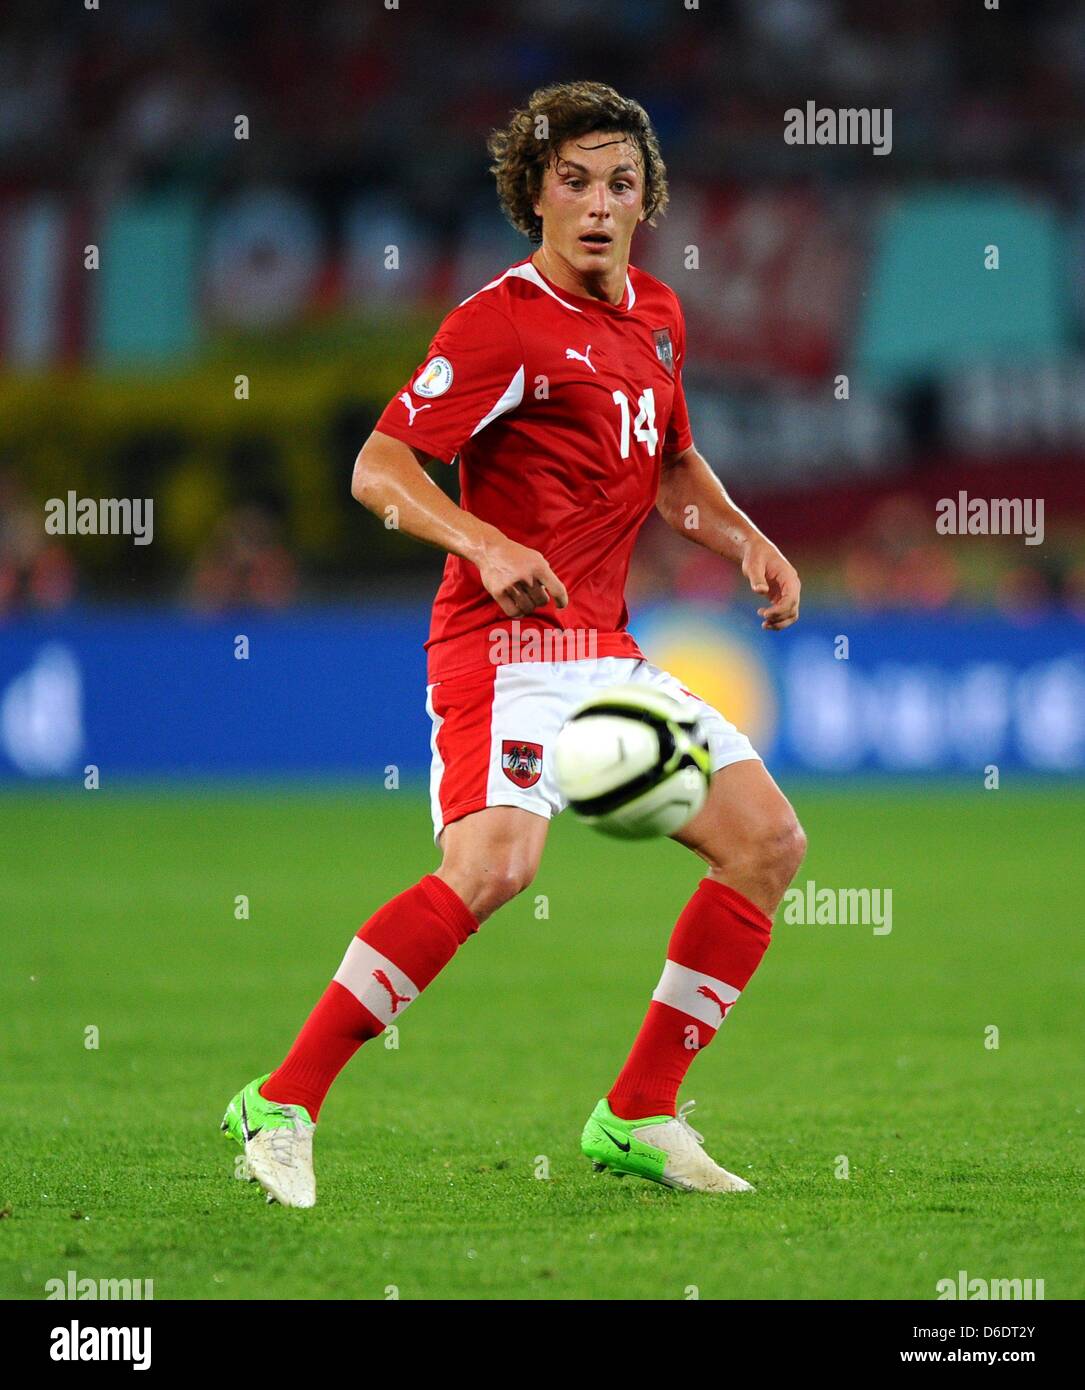 Austria's Julian Baumgartlinger plays the ball during the World Cup qualification match between Austria and Germany at Ernst-Happel-Stadium in Vienna, Germany, 11 September 2012. Photo: Thomas Eisenhuth Stock Photo